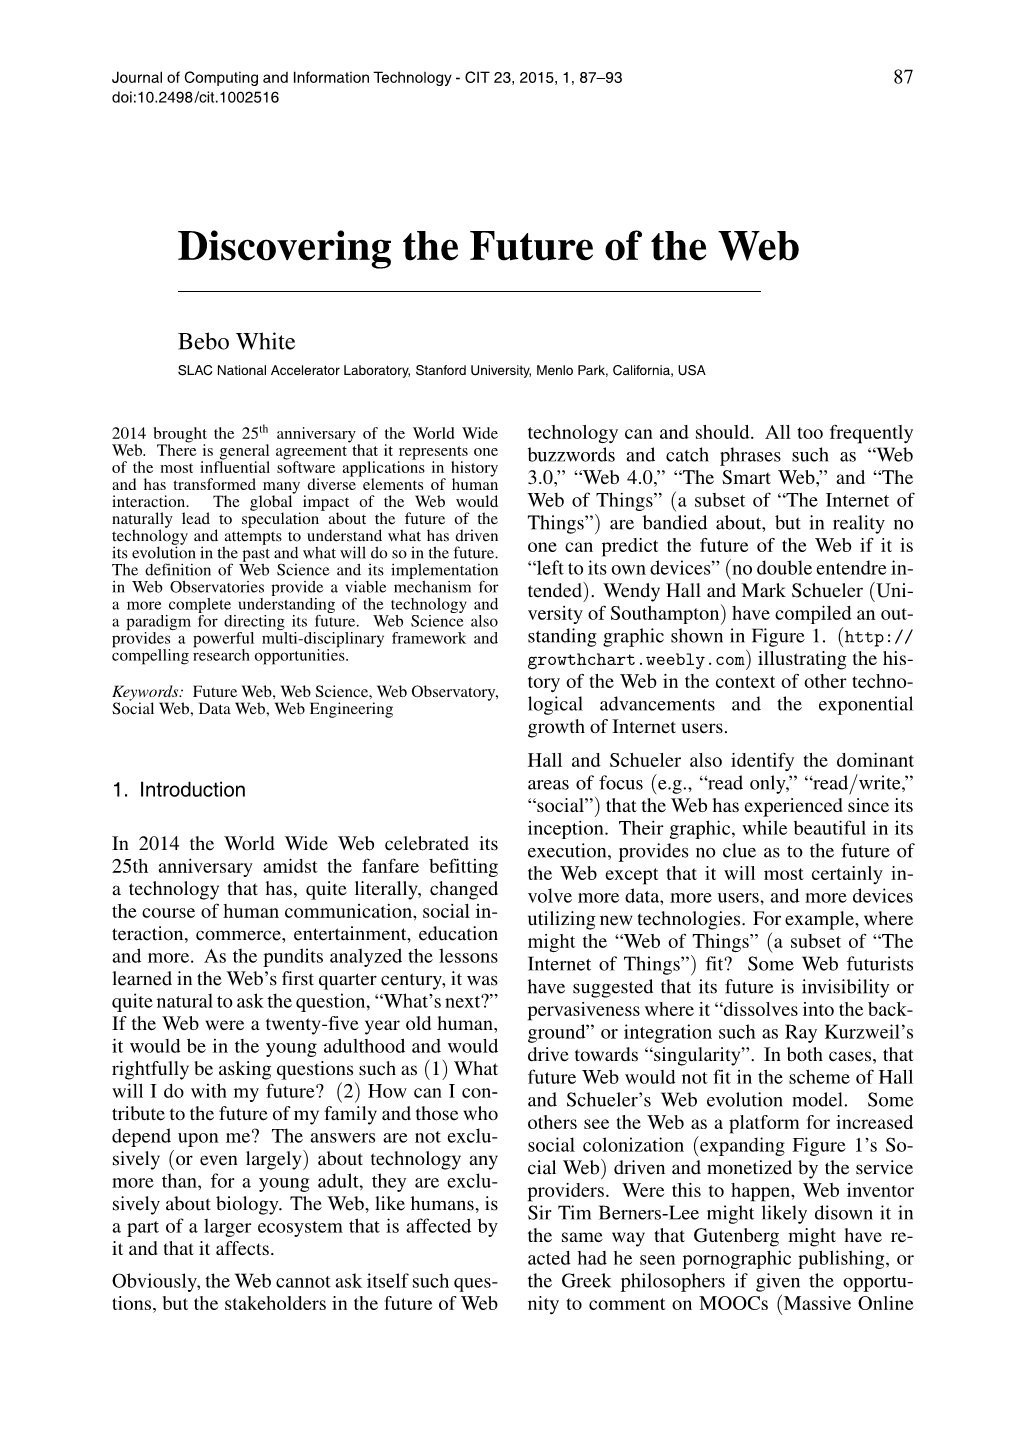 Discovering the Future of the Web